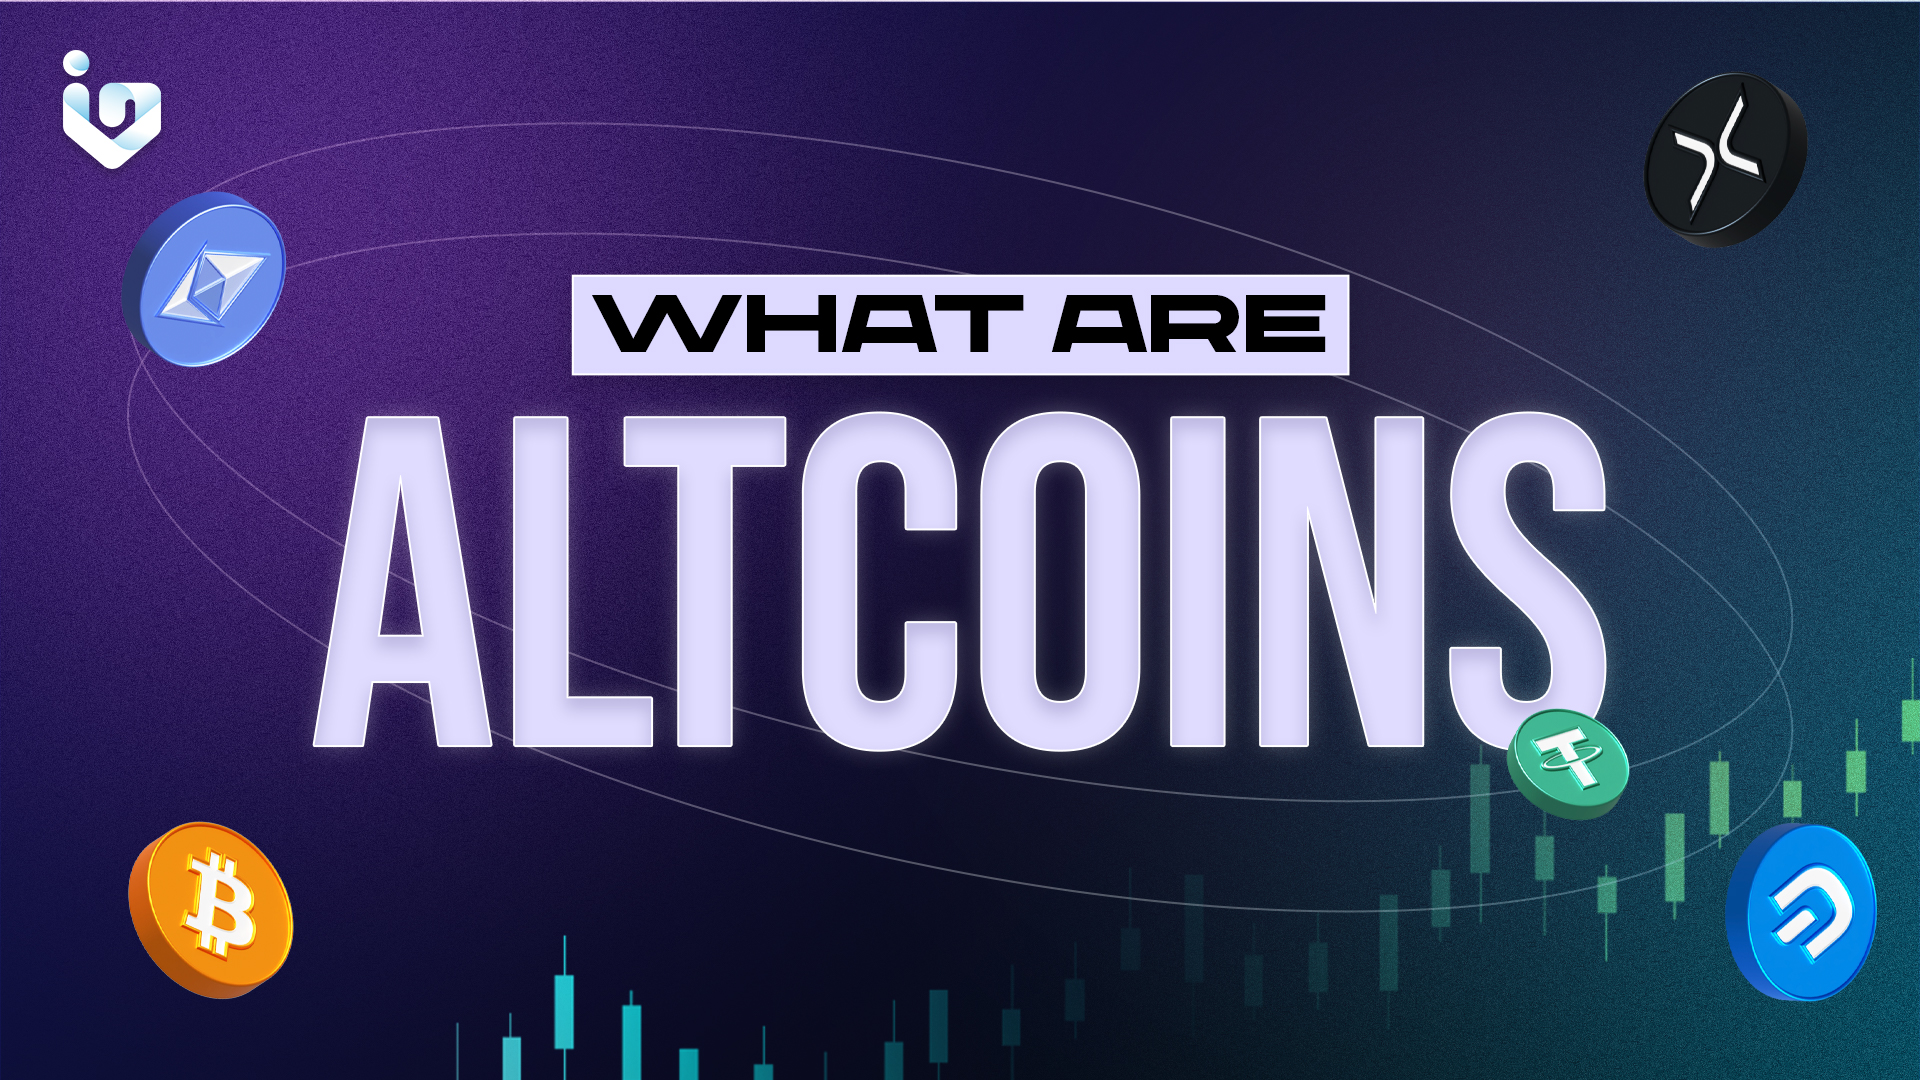 What are altcoins